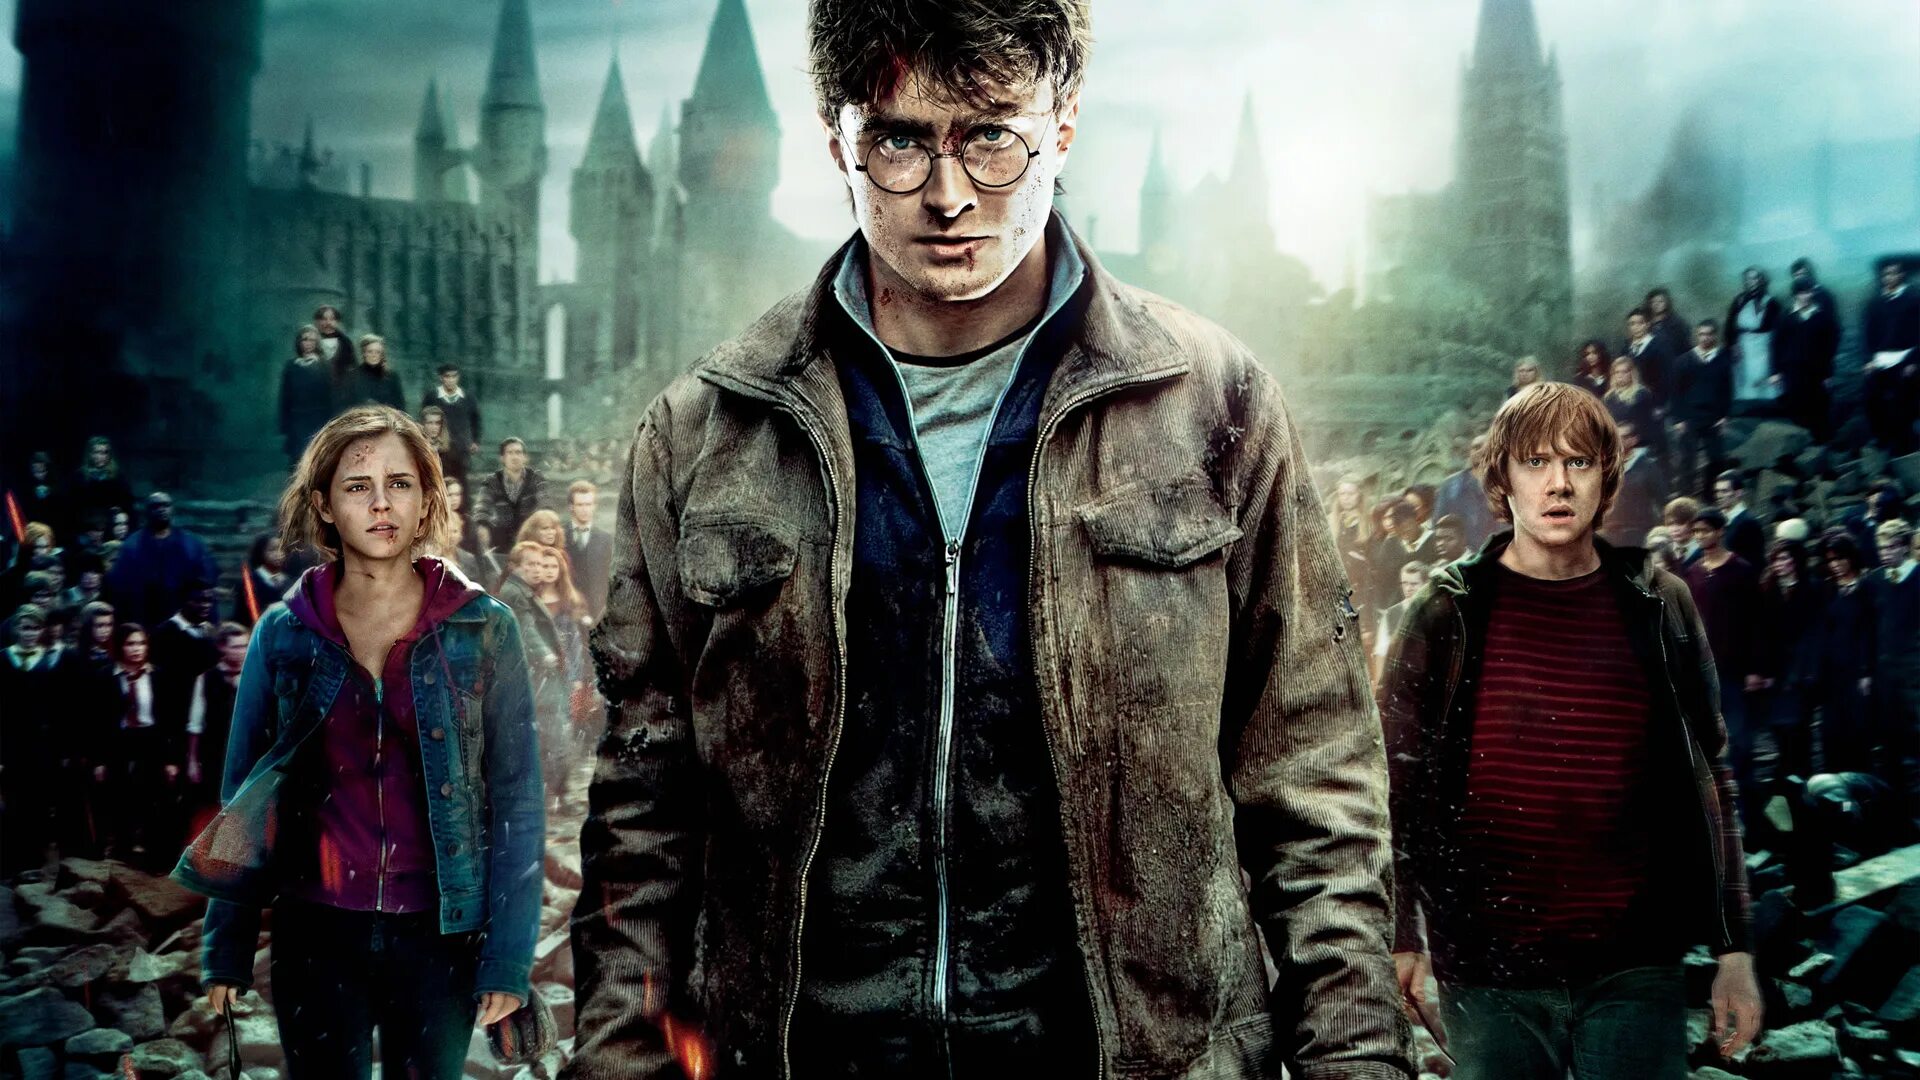 Harry Potter and the Deathly Hallows. Harry Potter and the Deathly Hallows: Part 1 (2010). Harry Potter and the Deathly Hallows Part 2. 7 поттеров читать